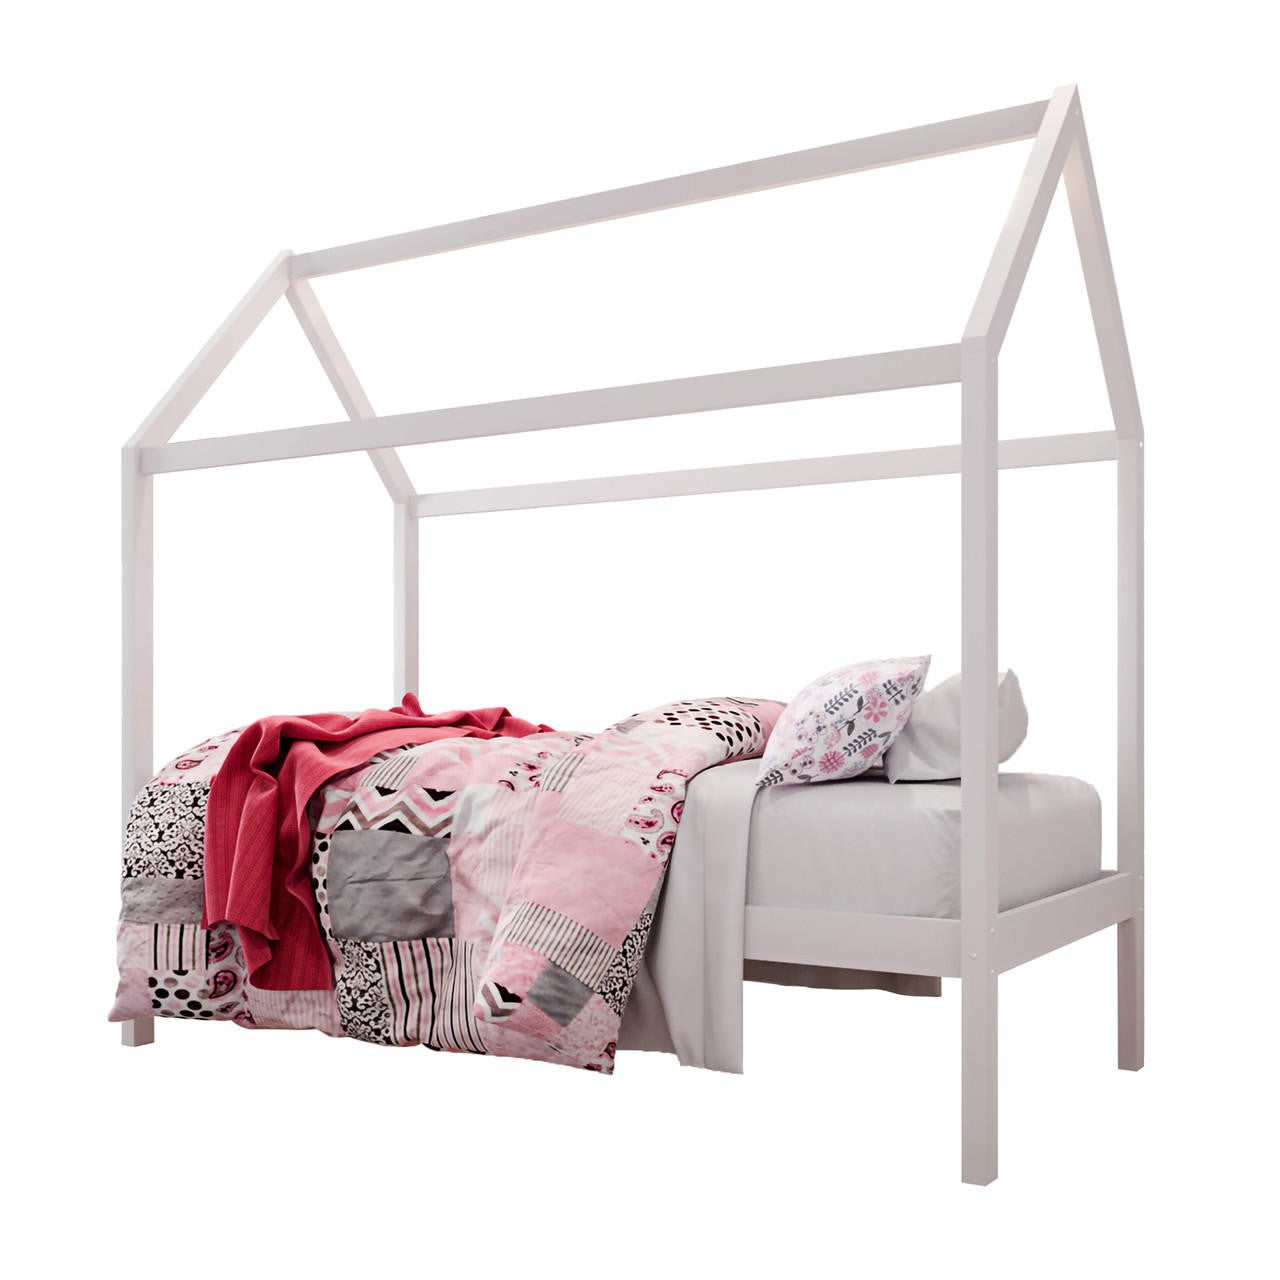 Doris Solid Pine Timber Single House Bed For Kids